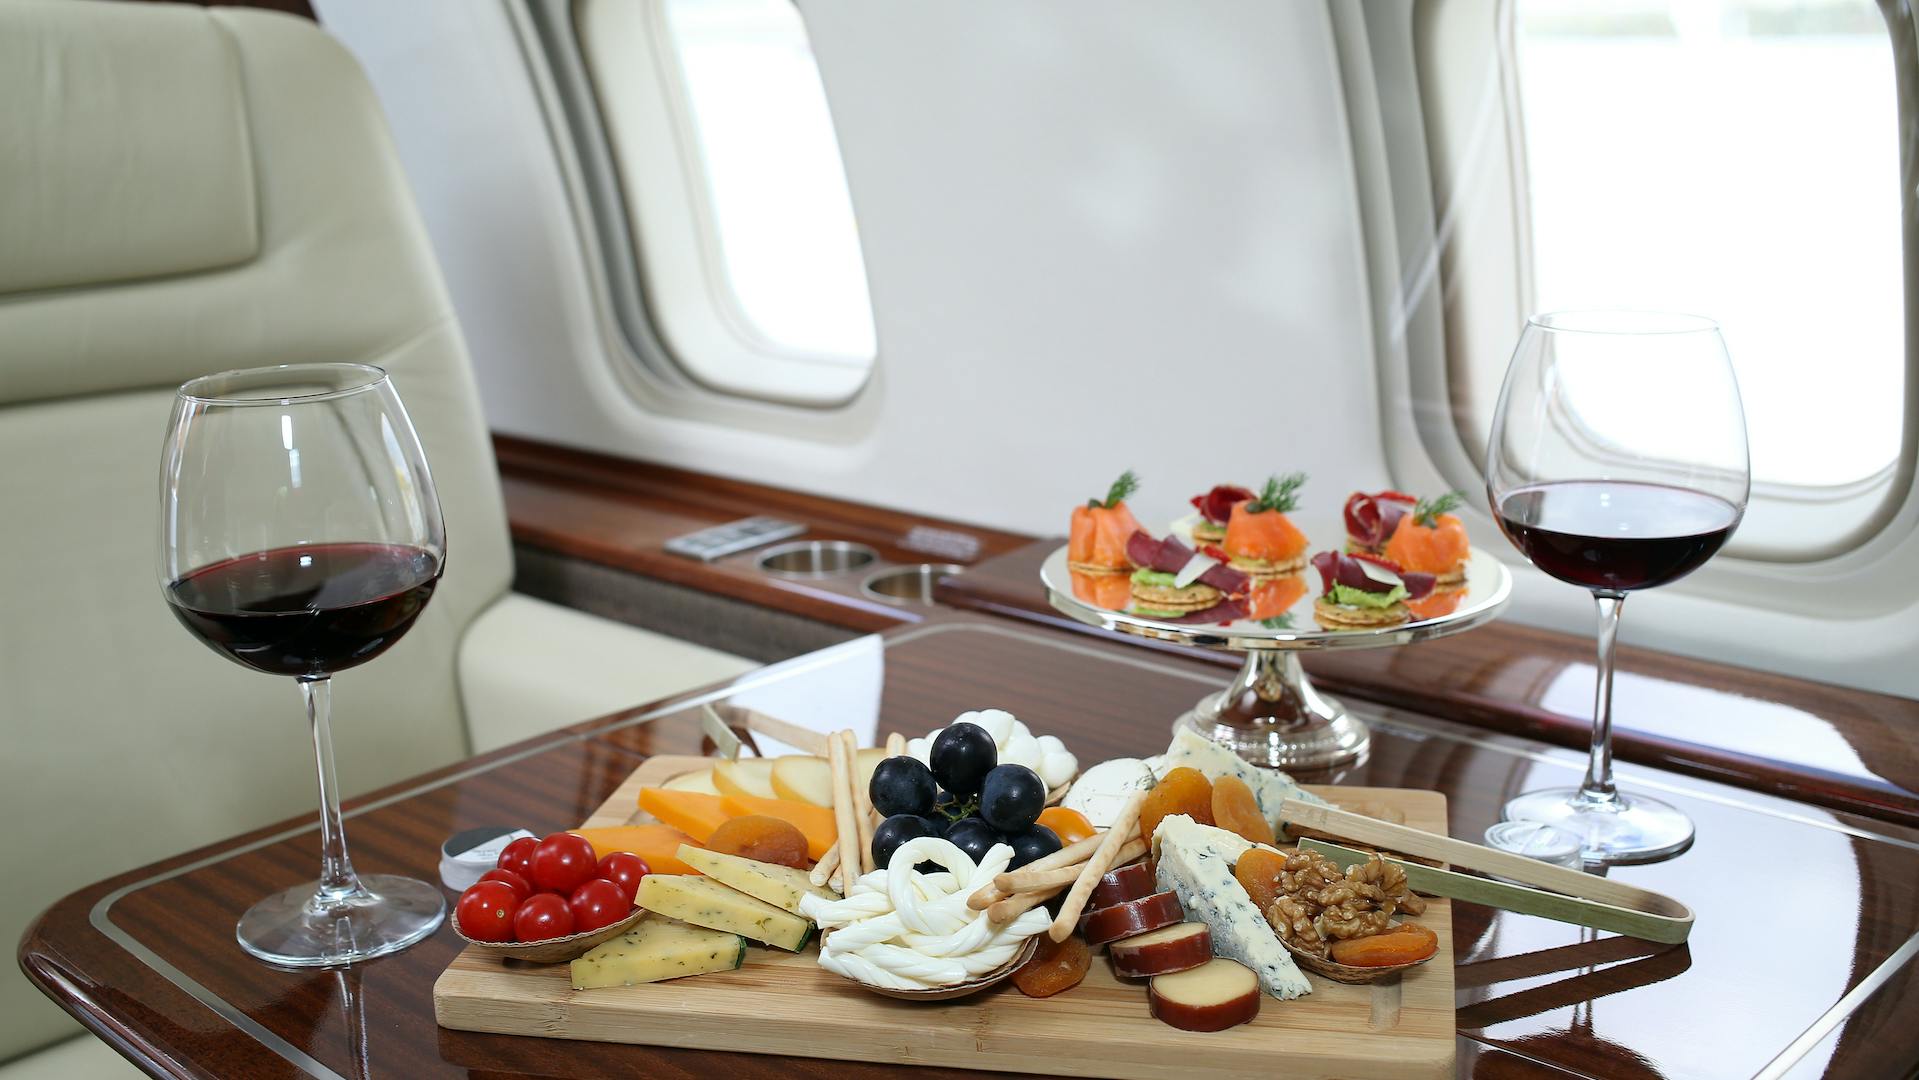 Satisfy every craving by requesting meals and any other amenity from your Private Aviation Advisor.